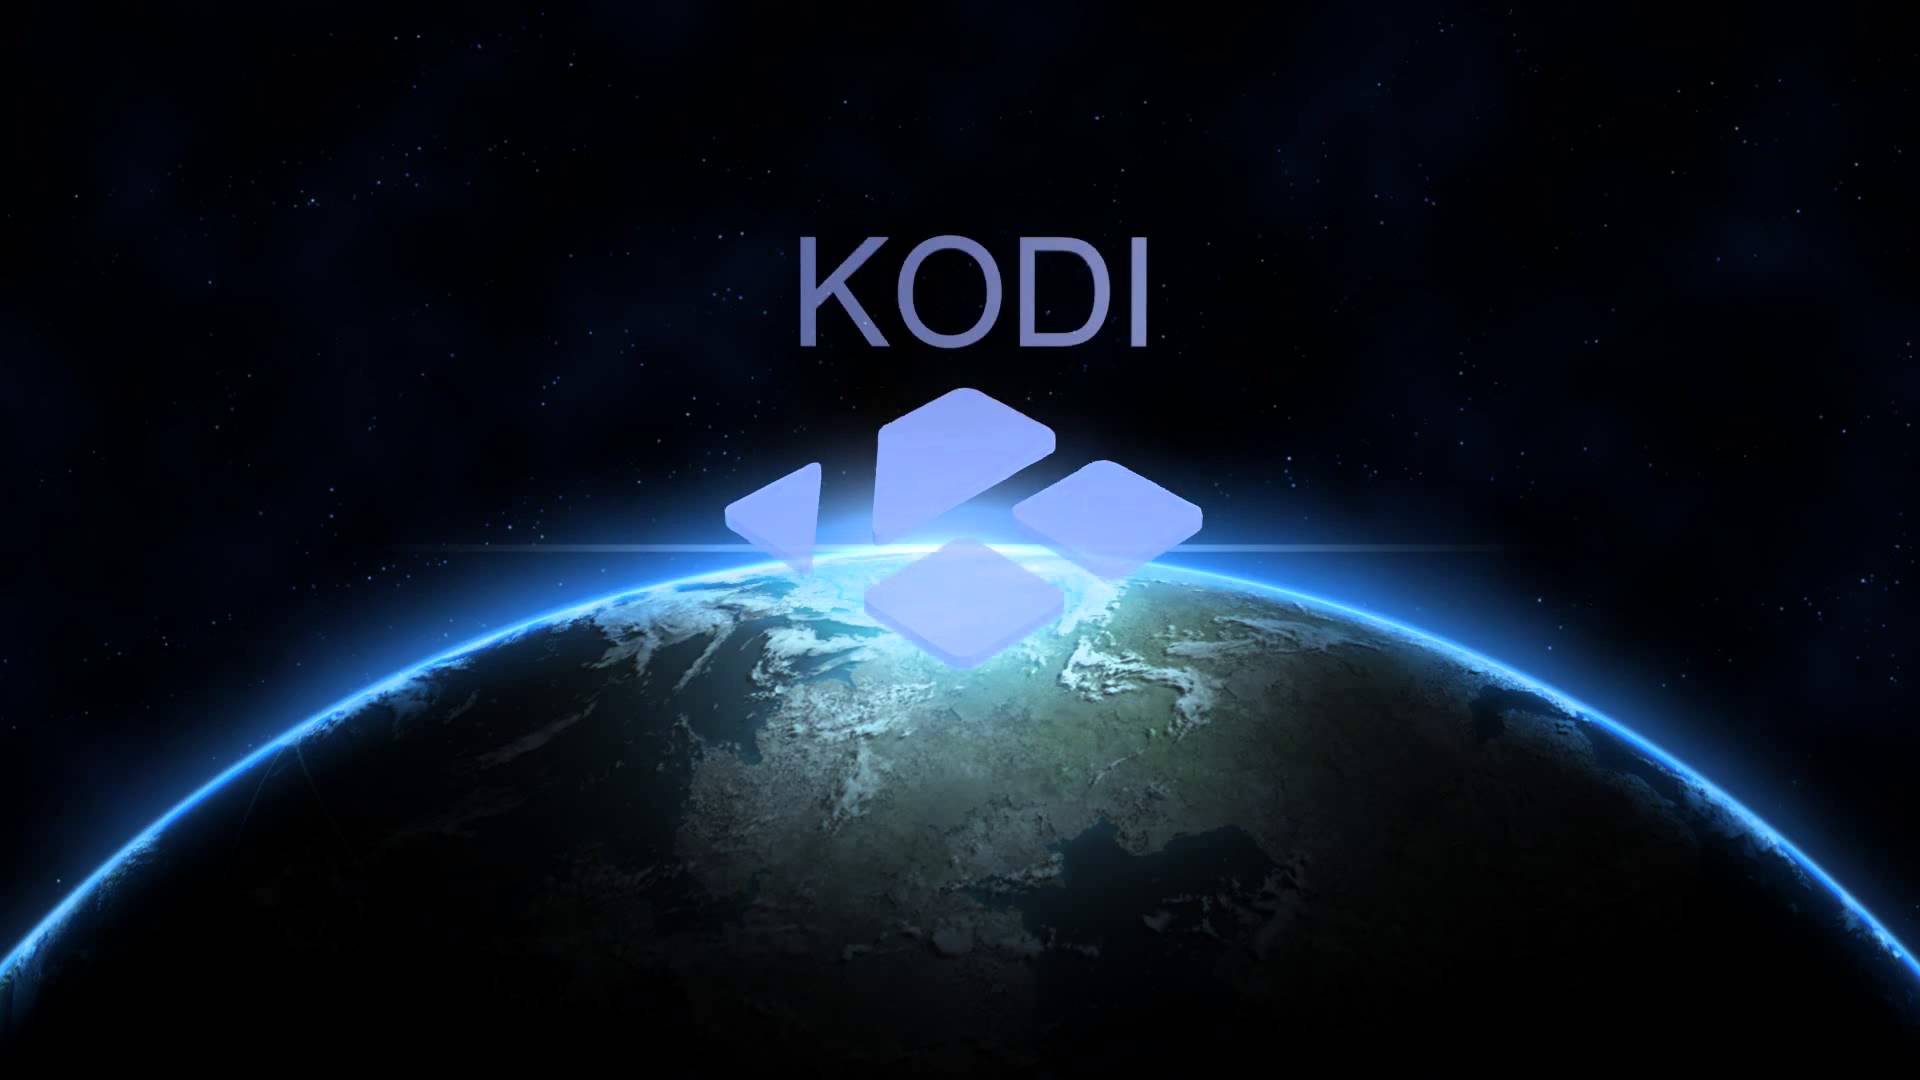 kodi wallpaper 1920x1080,outer space,atmosphere,light,astronomical object,space